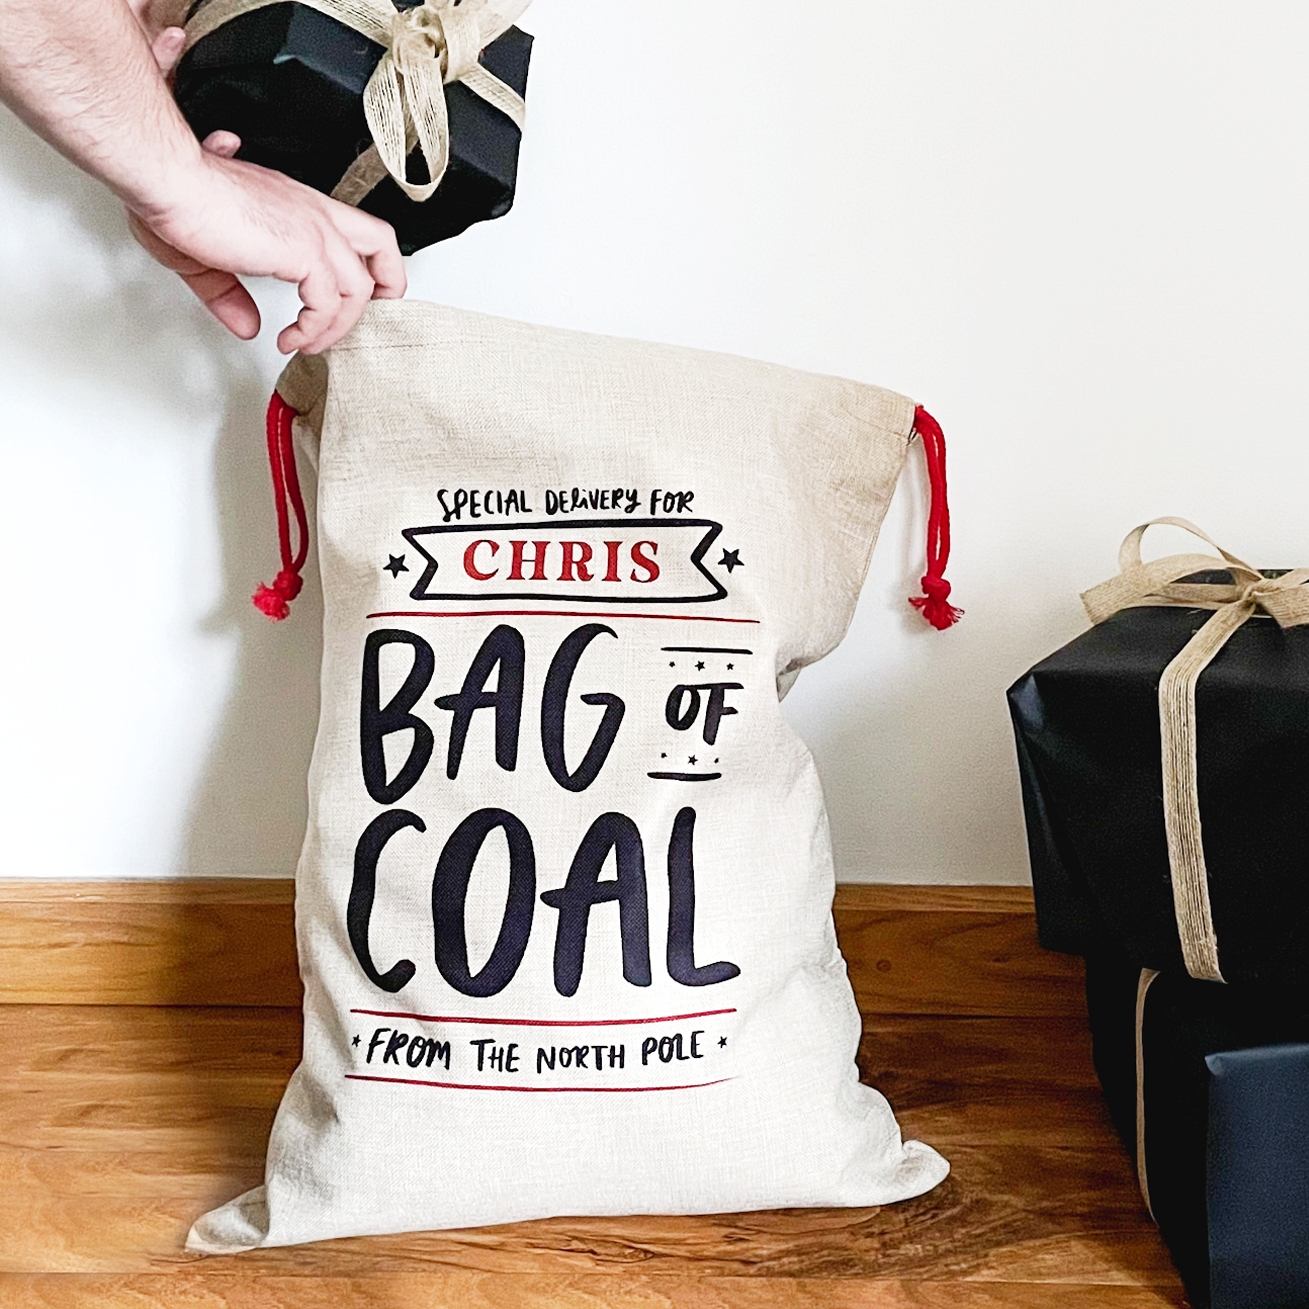 2,414 Coal Bag Royalty-Free Photos and Stock Images | Shutterstock